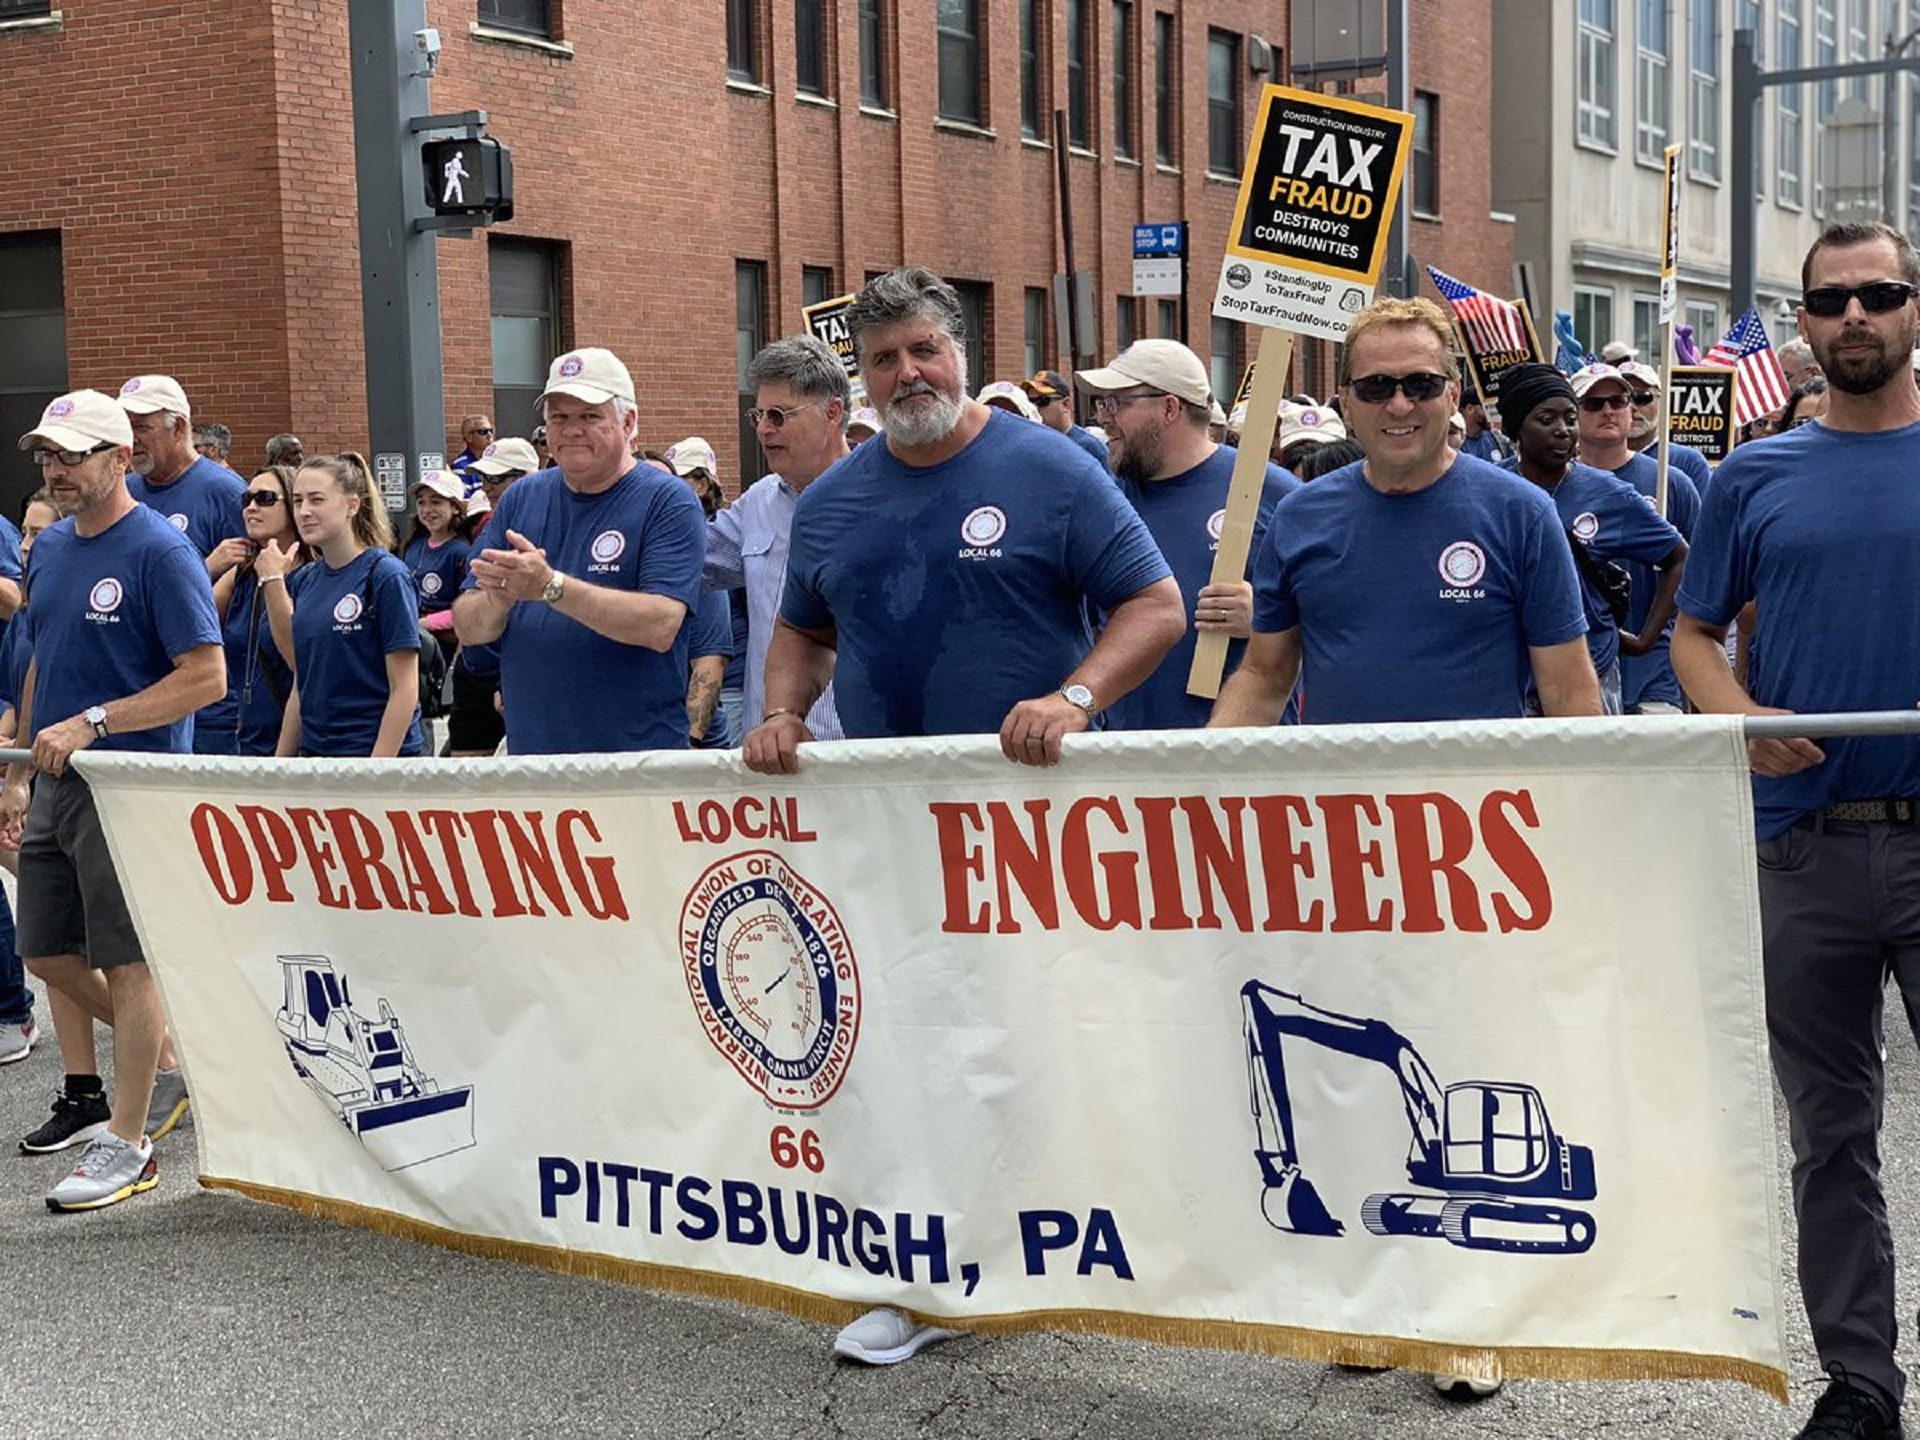 Members of Local 66 of the International Union of Operating Engineers march in Pittsburgh's 2019 Labor Day parade.